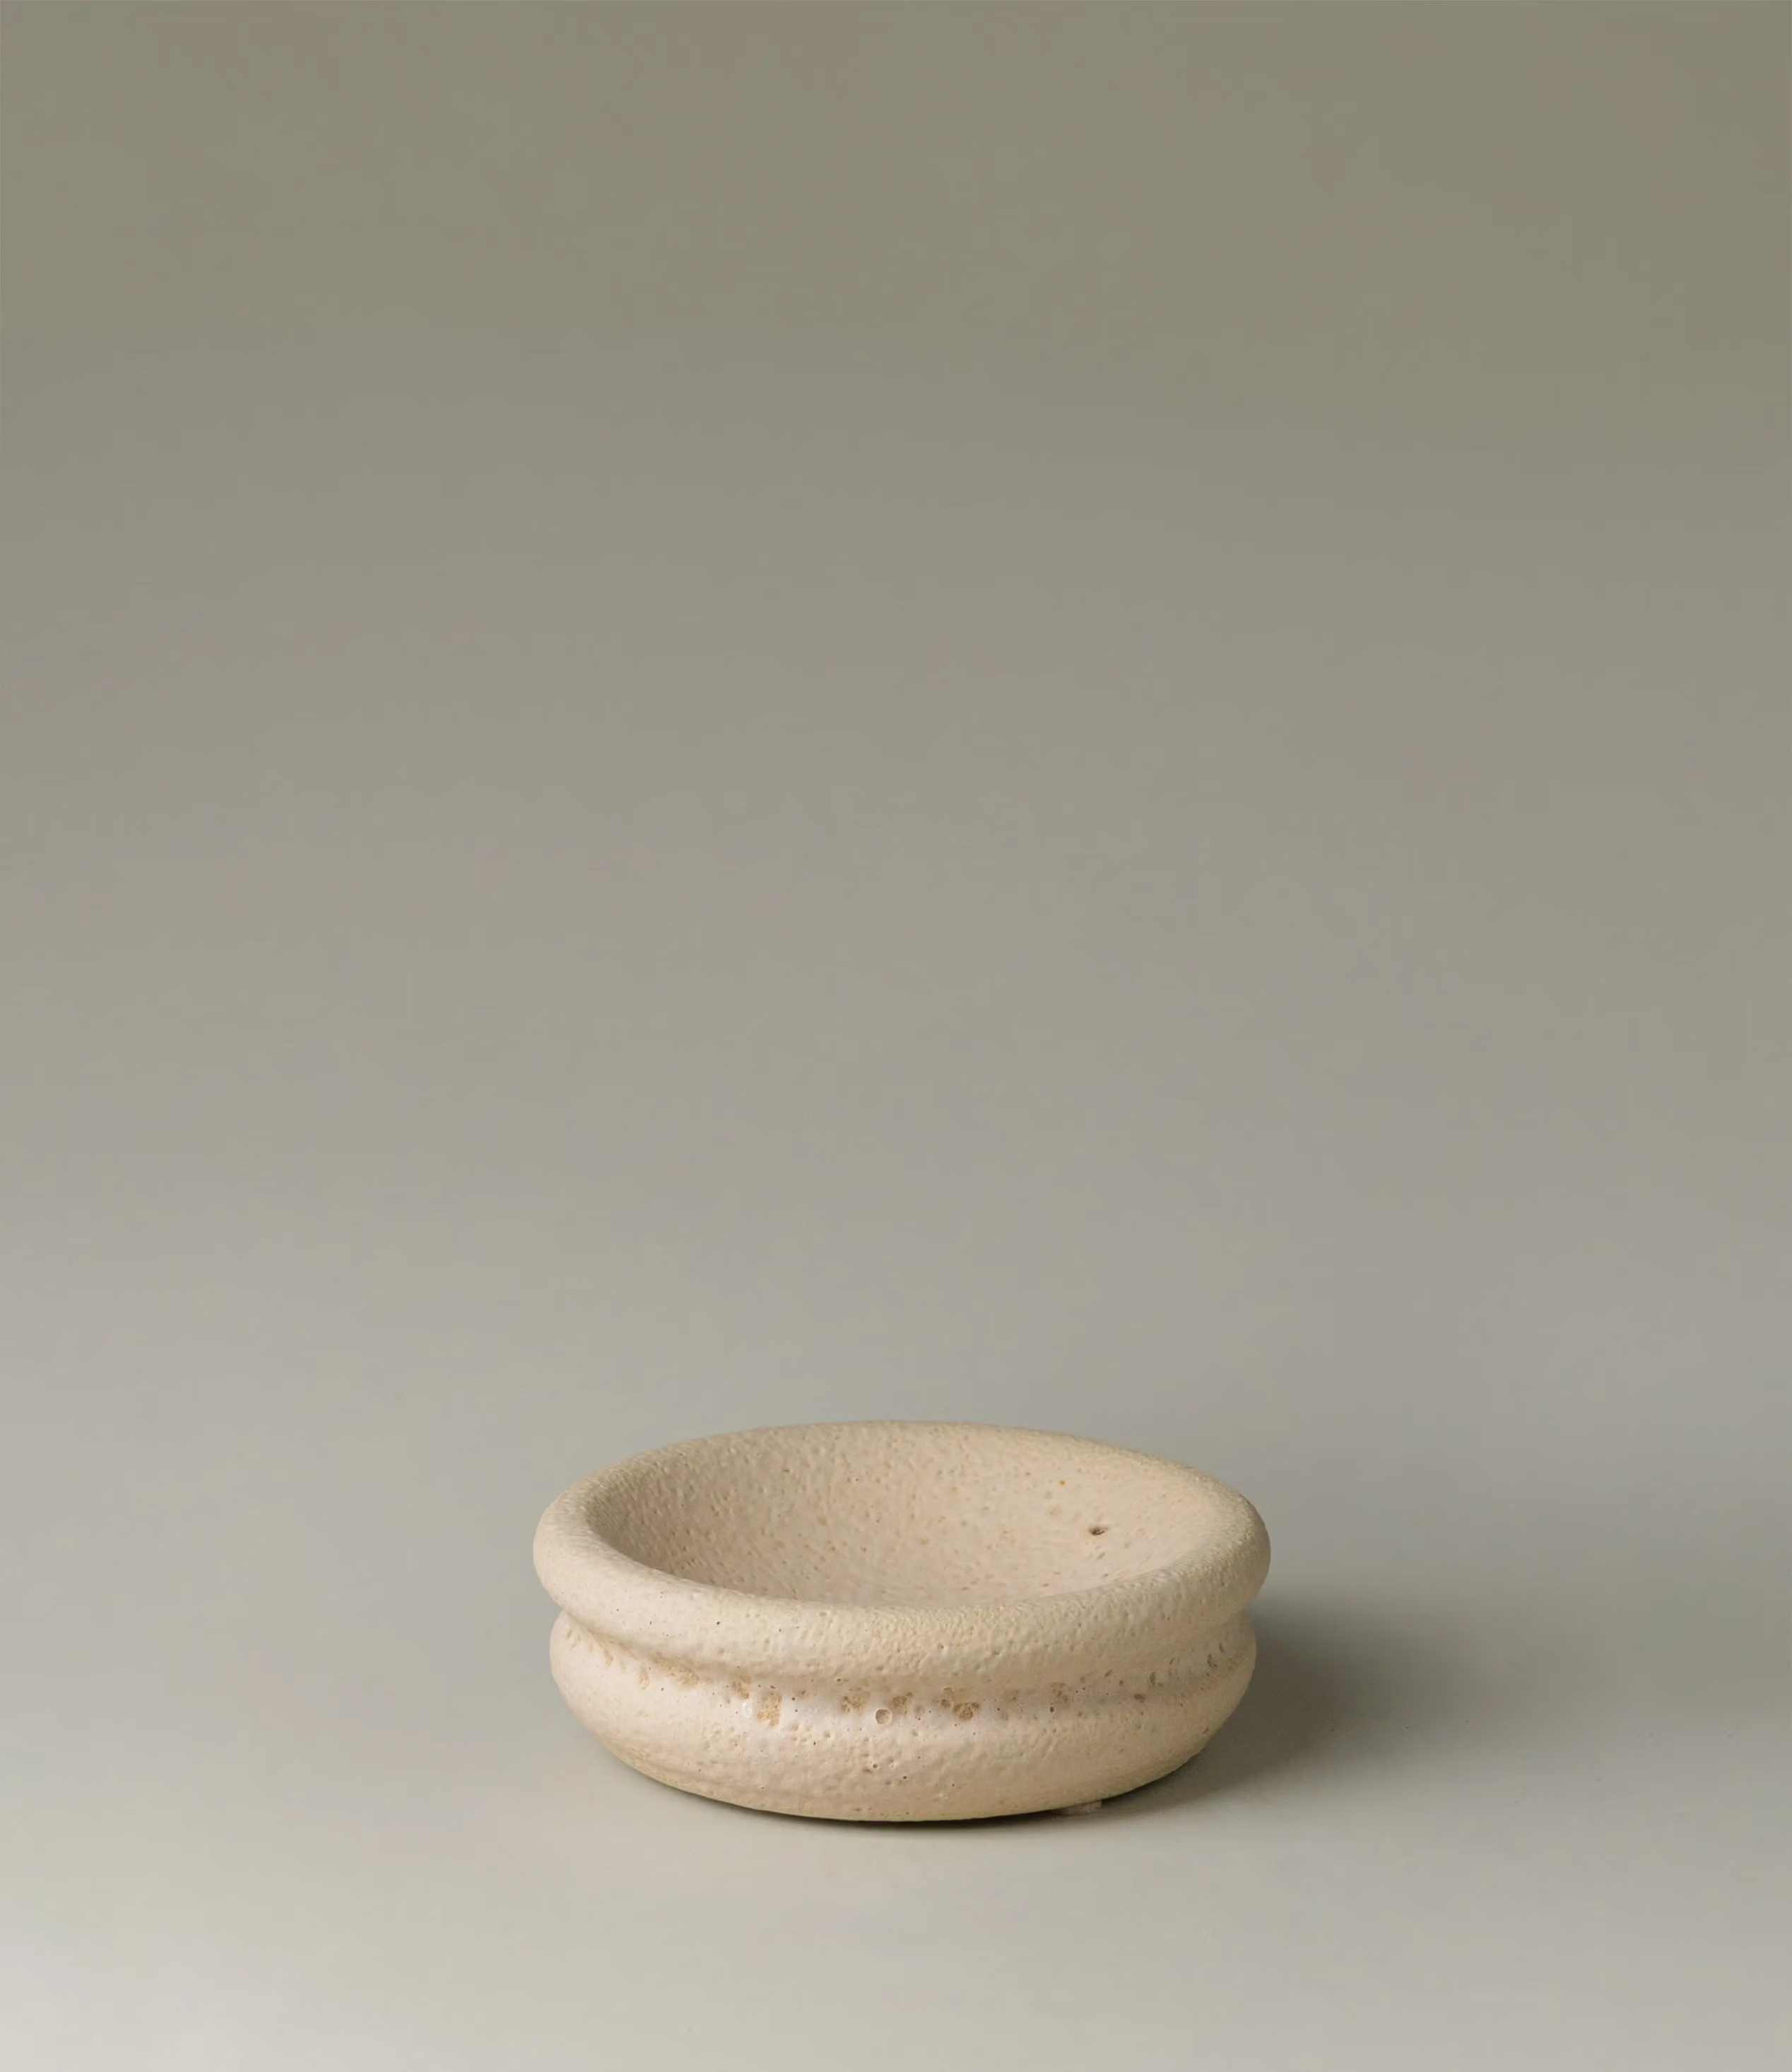 Lyot Incense Holder designed by Ocactuu has a sand texture and comes in a light nude color. The rounded plate has the place for your incense close to the edge of it.